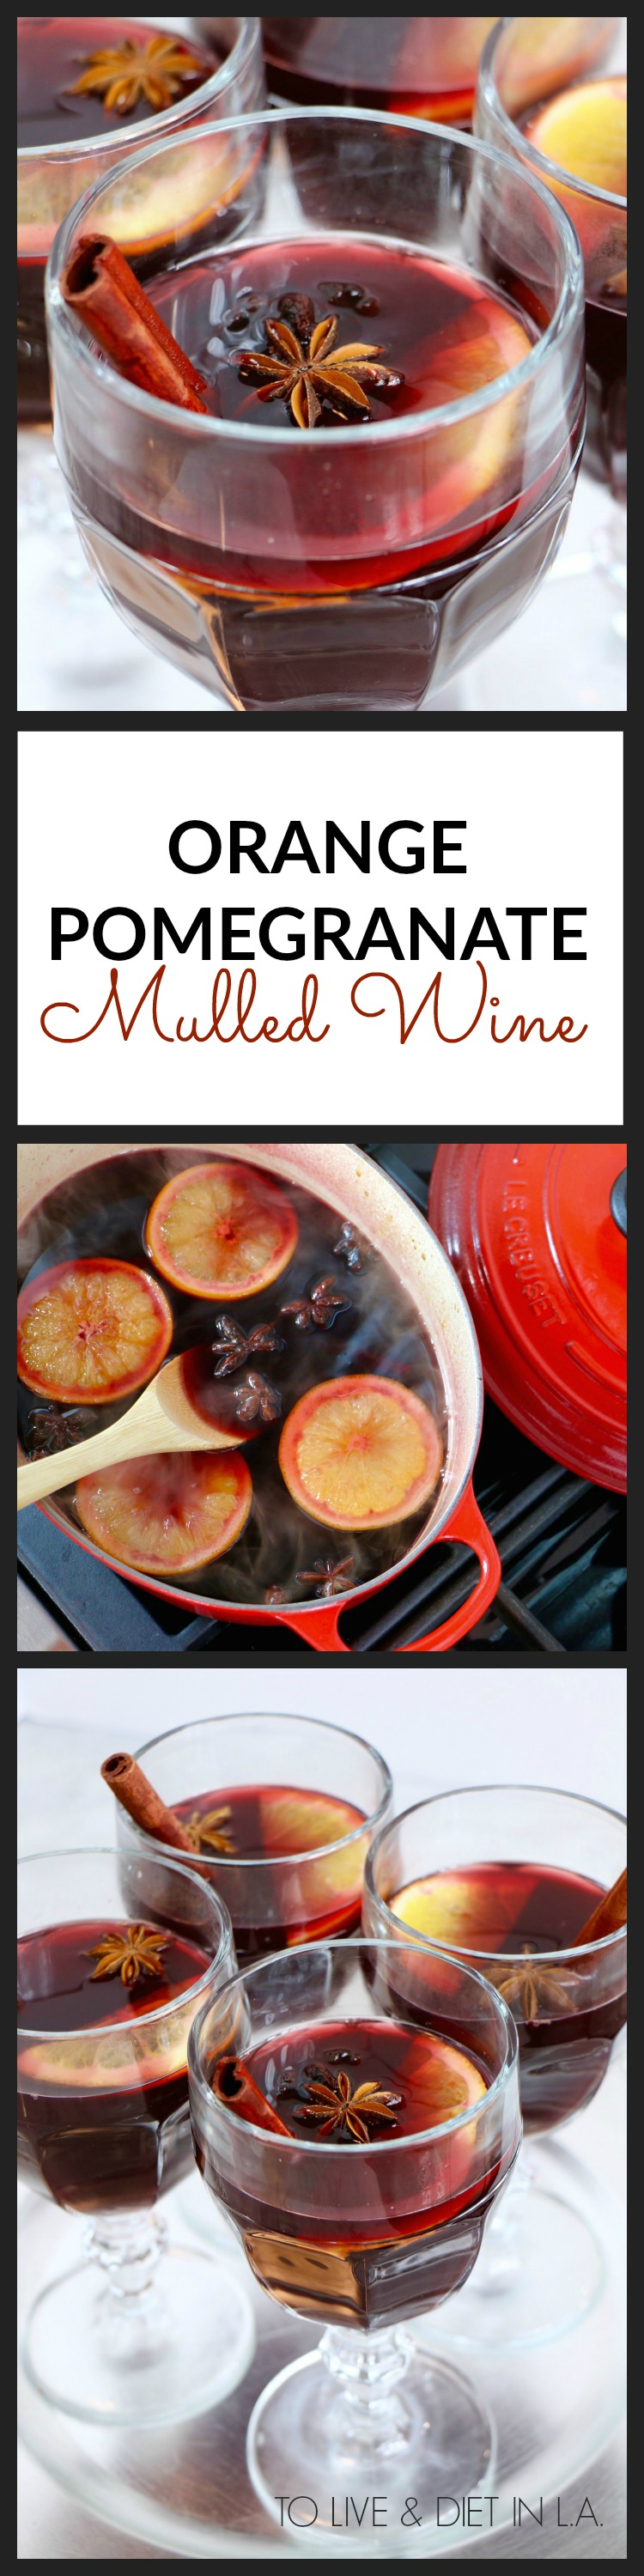 Orange Pomegranate Mulled Wine Recipe - the perfect healthy holiday cocktail.